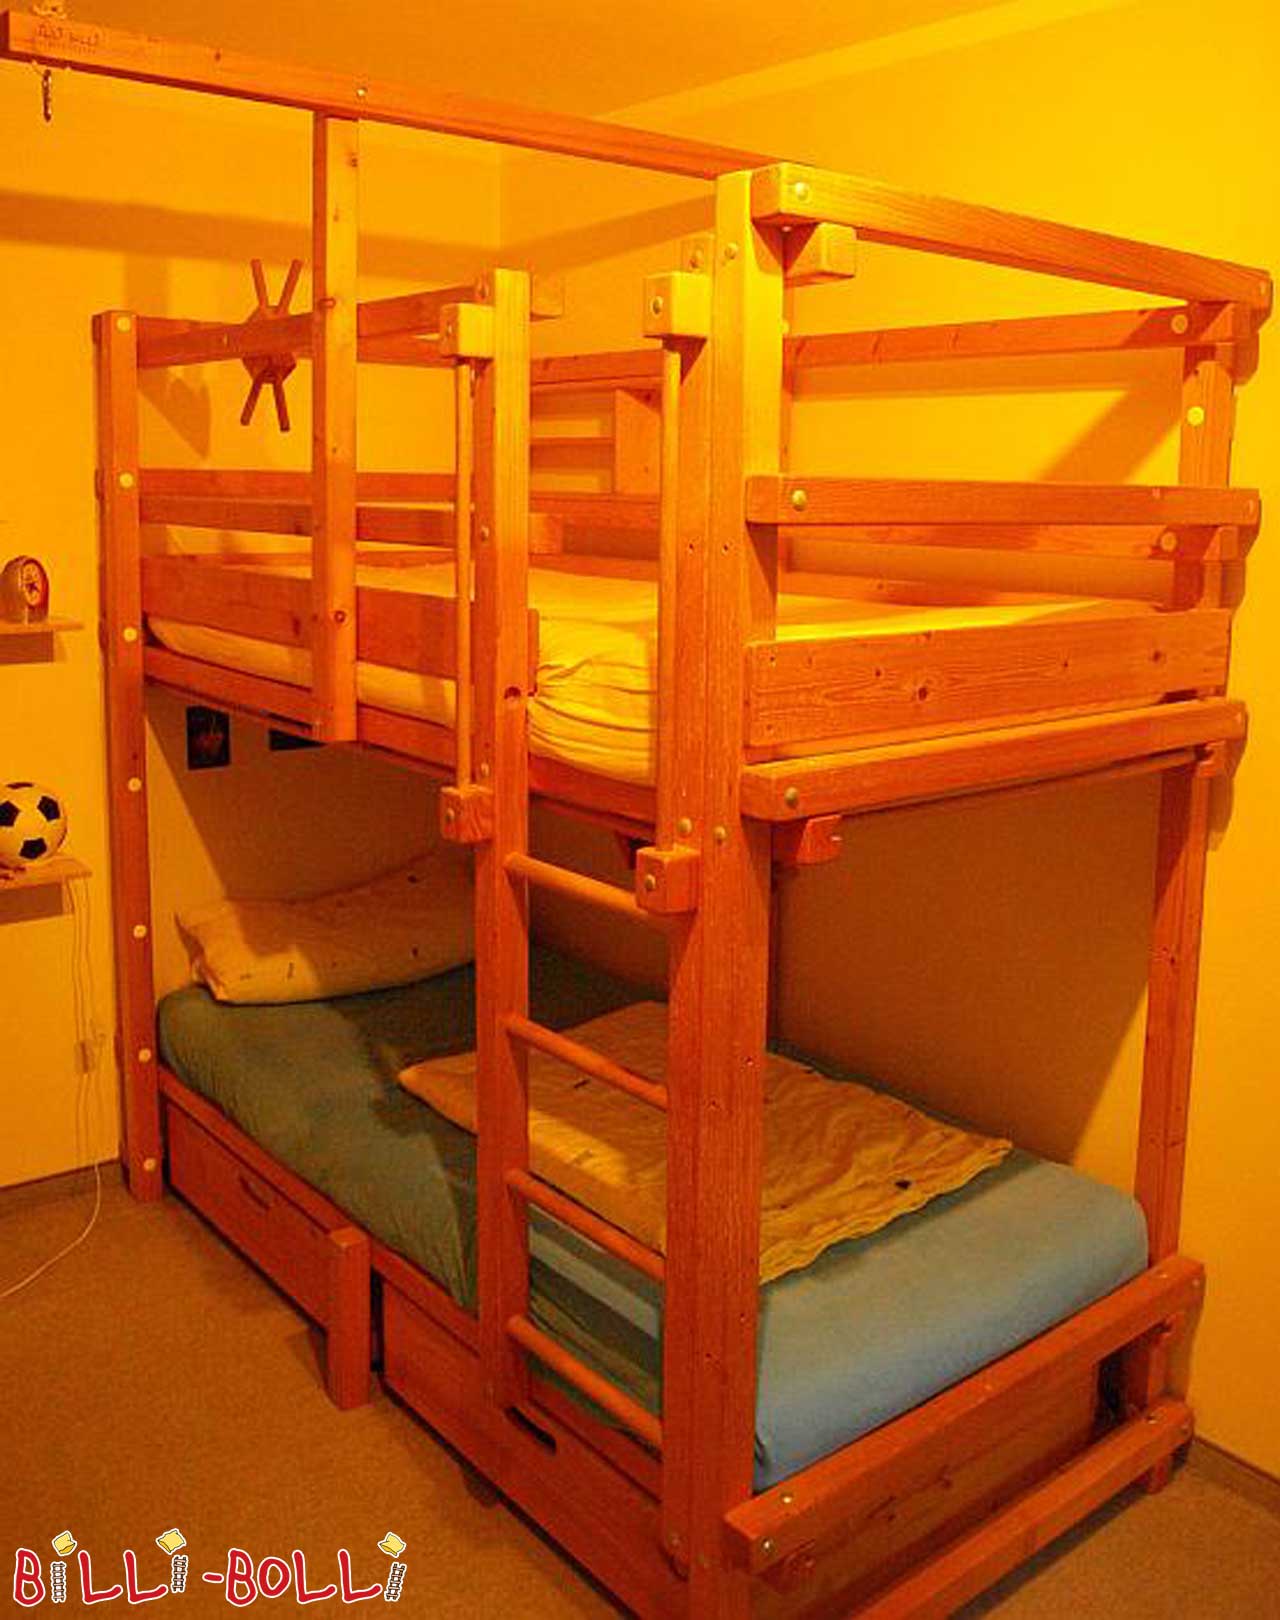 Billi-Bolli bunk bed (Category: second hand bunk bed)